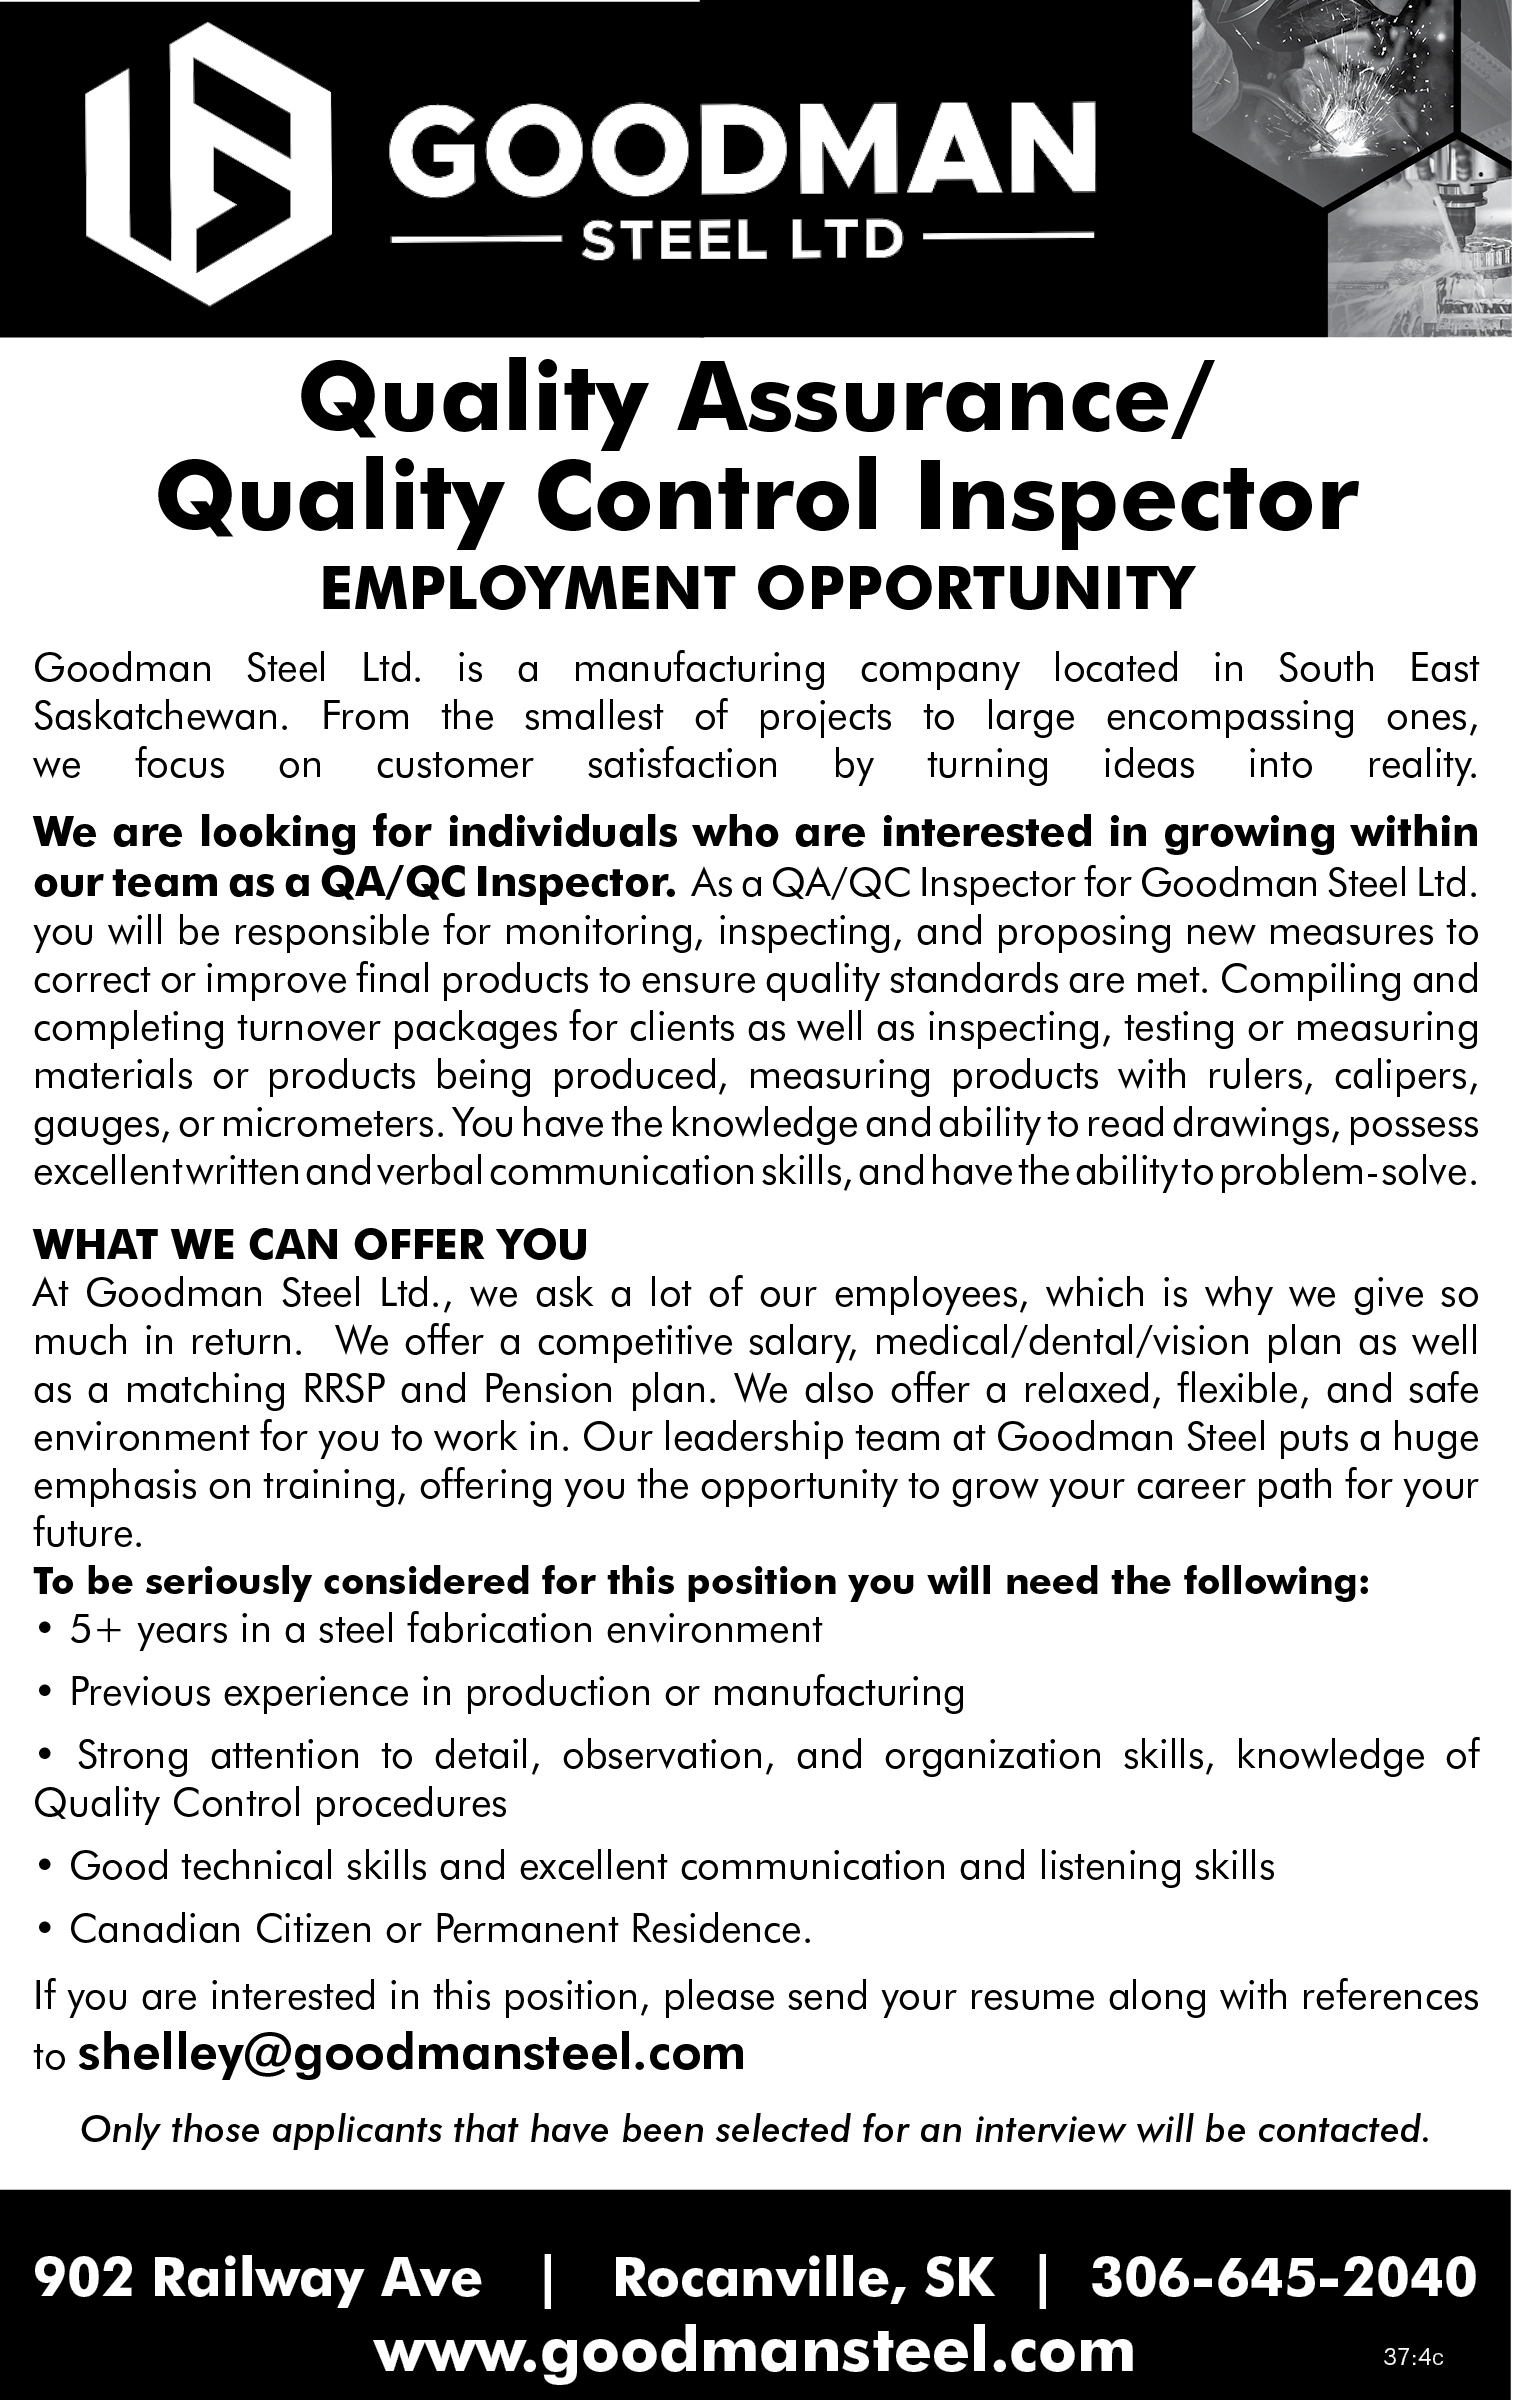 Goodman Steel - Rocanville - Quality Assurance/Quality Control Inspector 